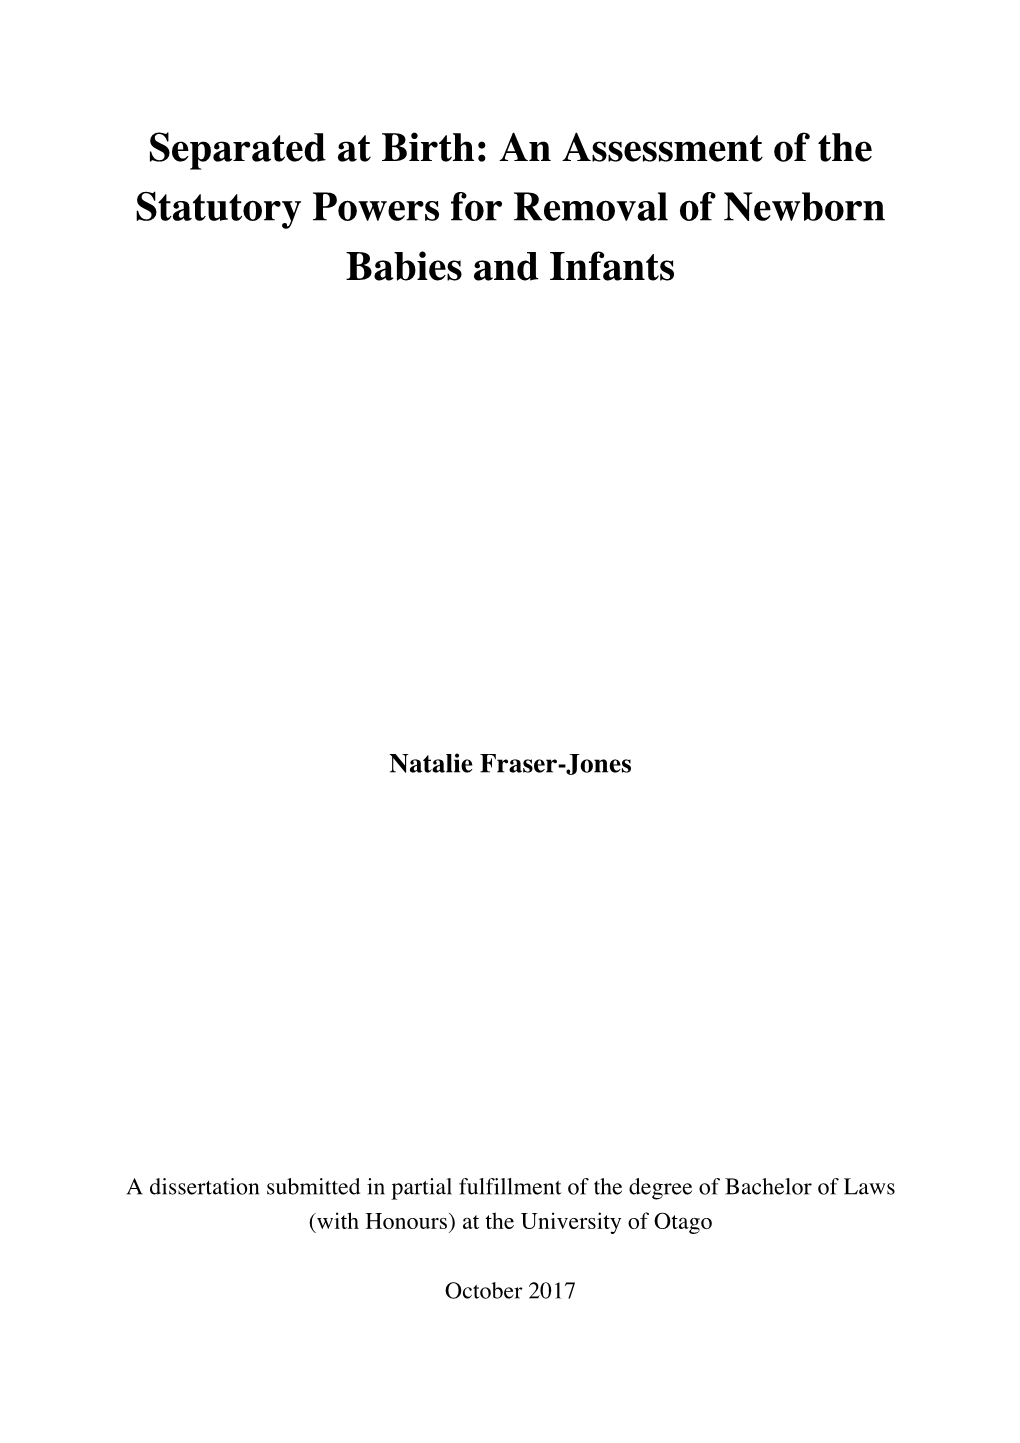 Separated at Birth: an Assessment of the Statutory Powers for Removal of Newborn Babies and Infants